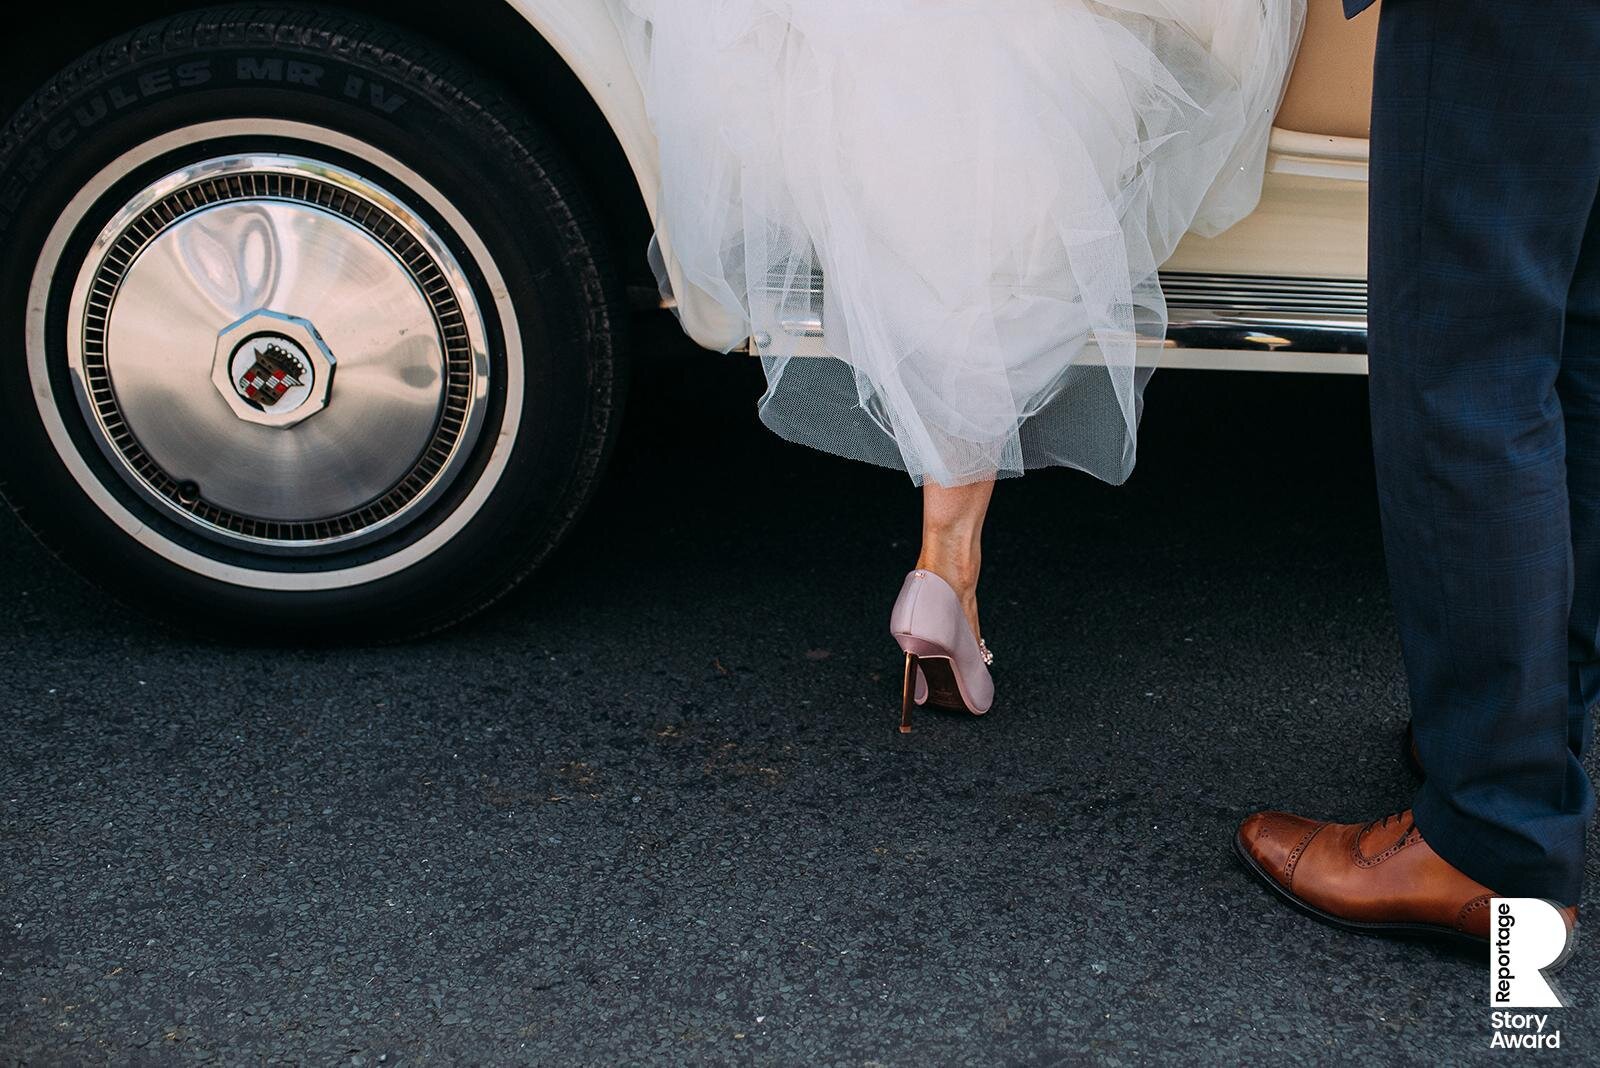  Brides shoe stepping out of the wedding car. 